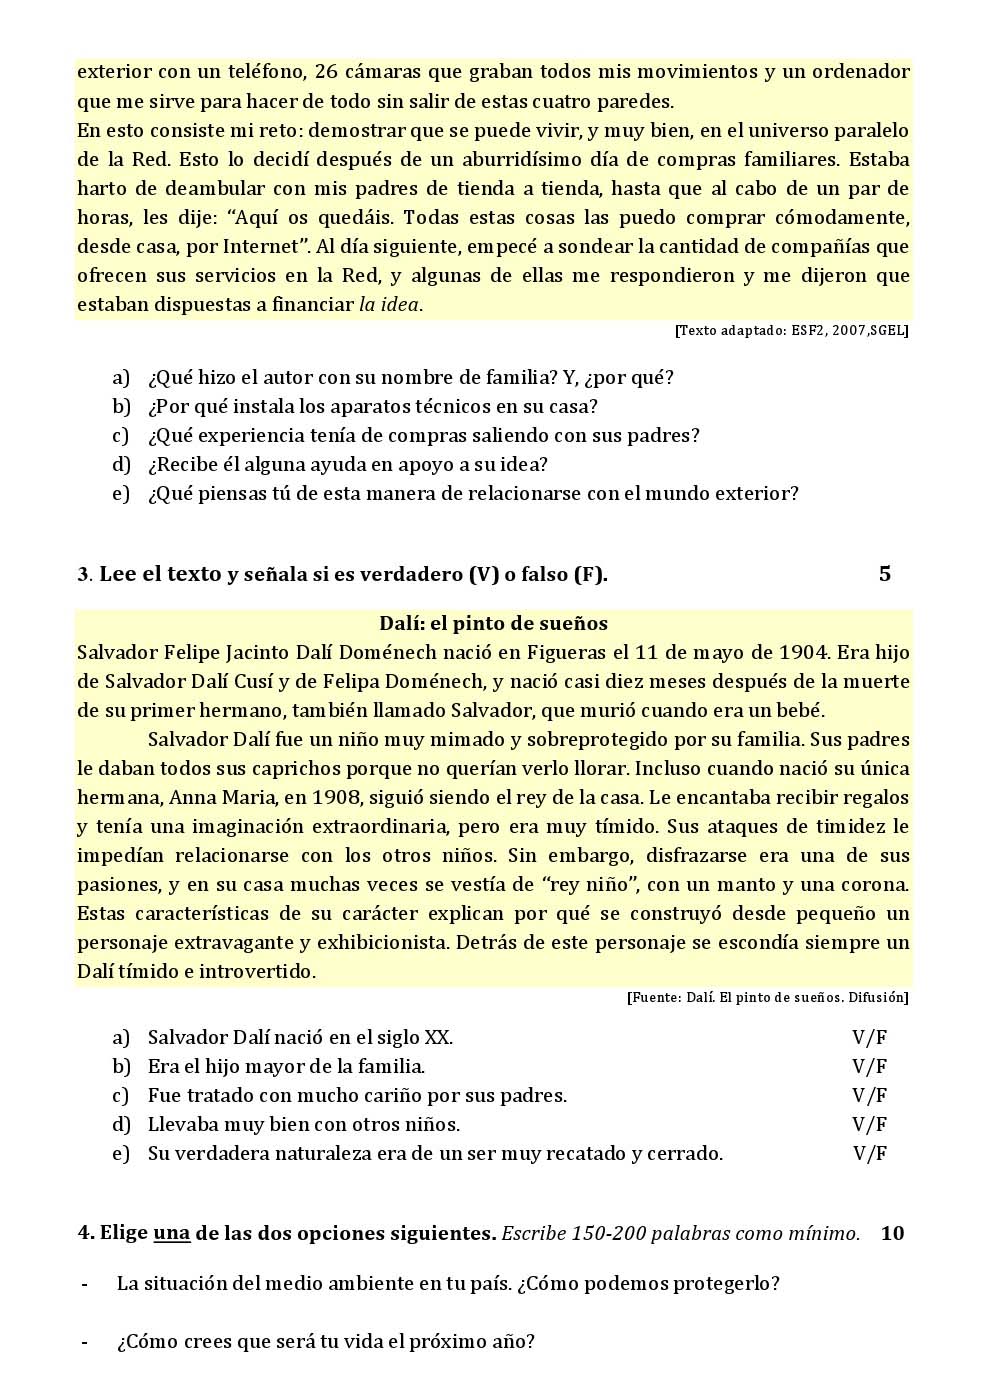 Spanish CBSE Class X Sample Question Paper 2018-19 - Image 2